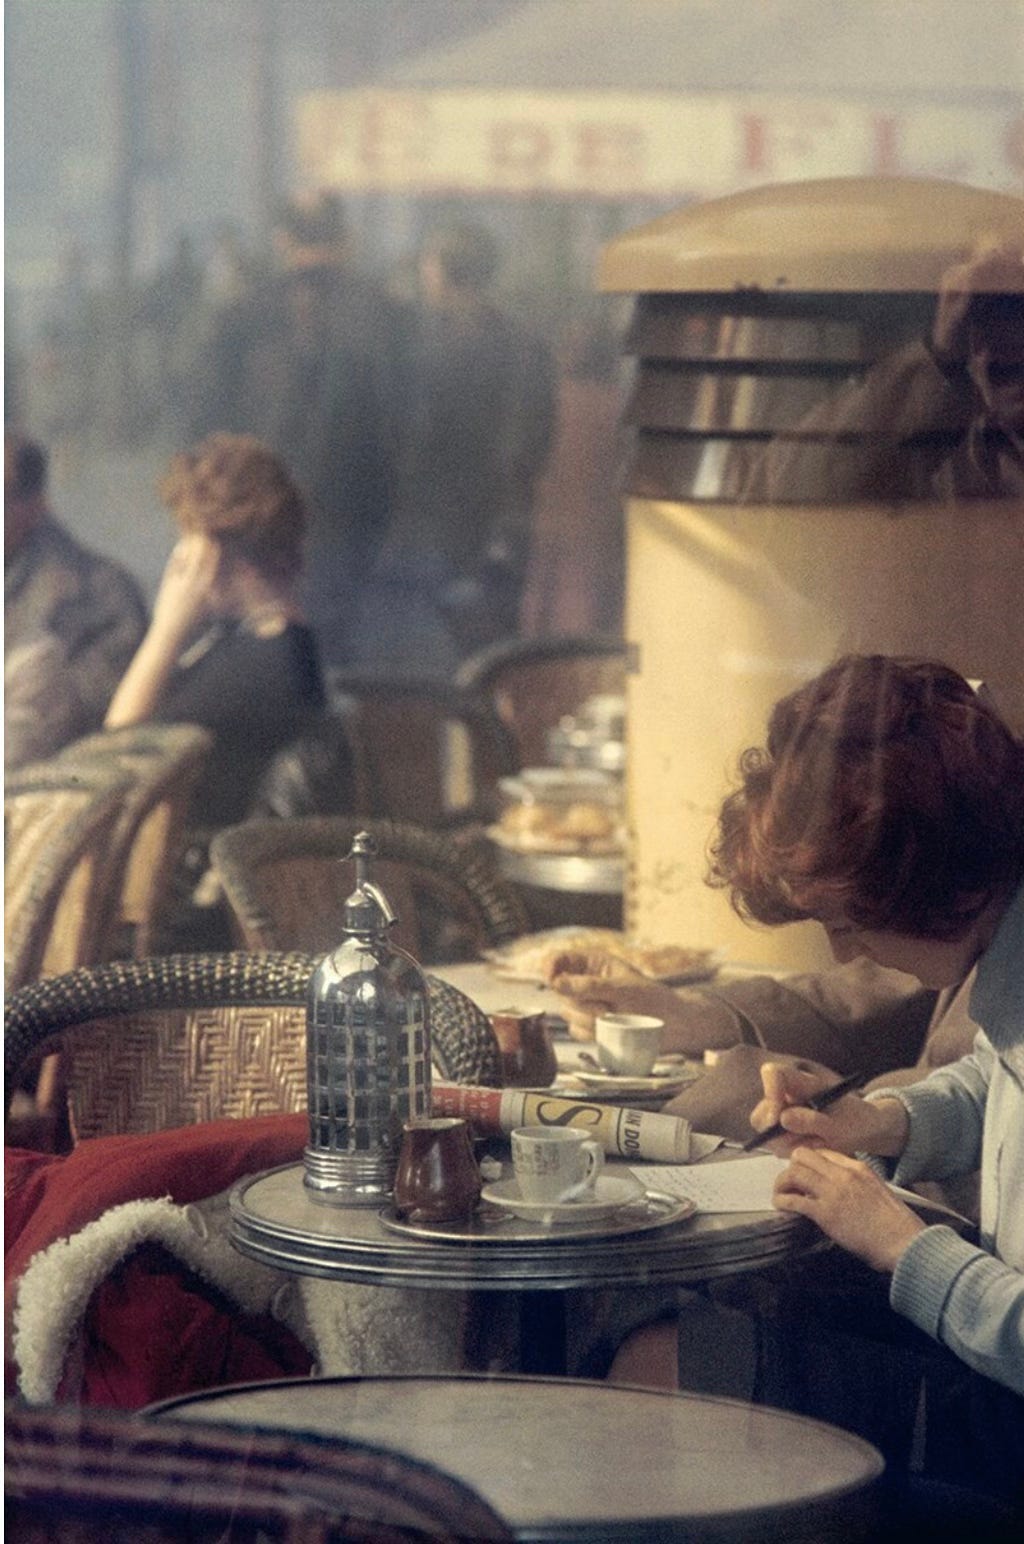 Early color photograph from Saul Leiter